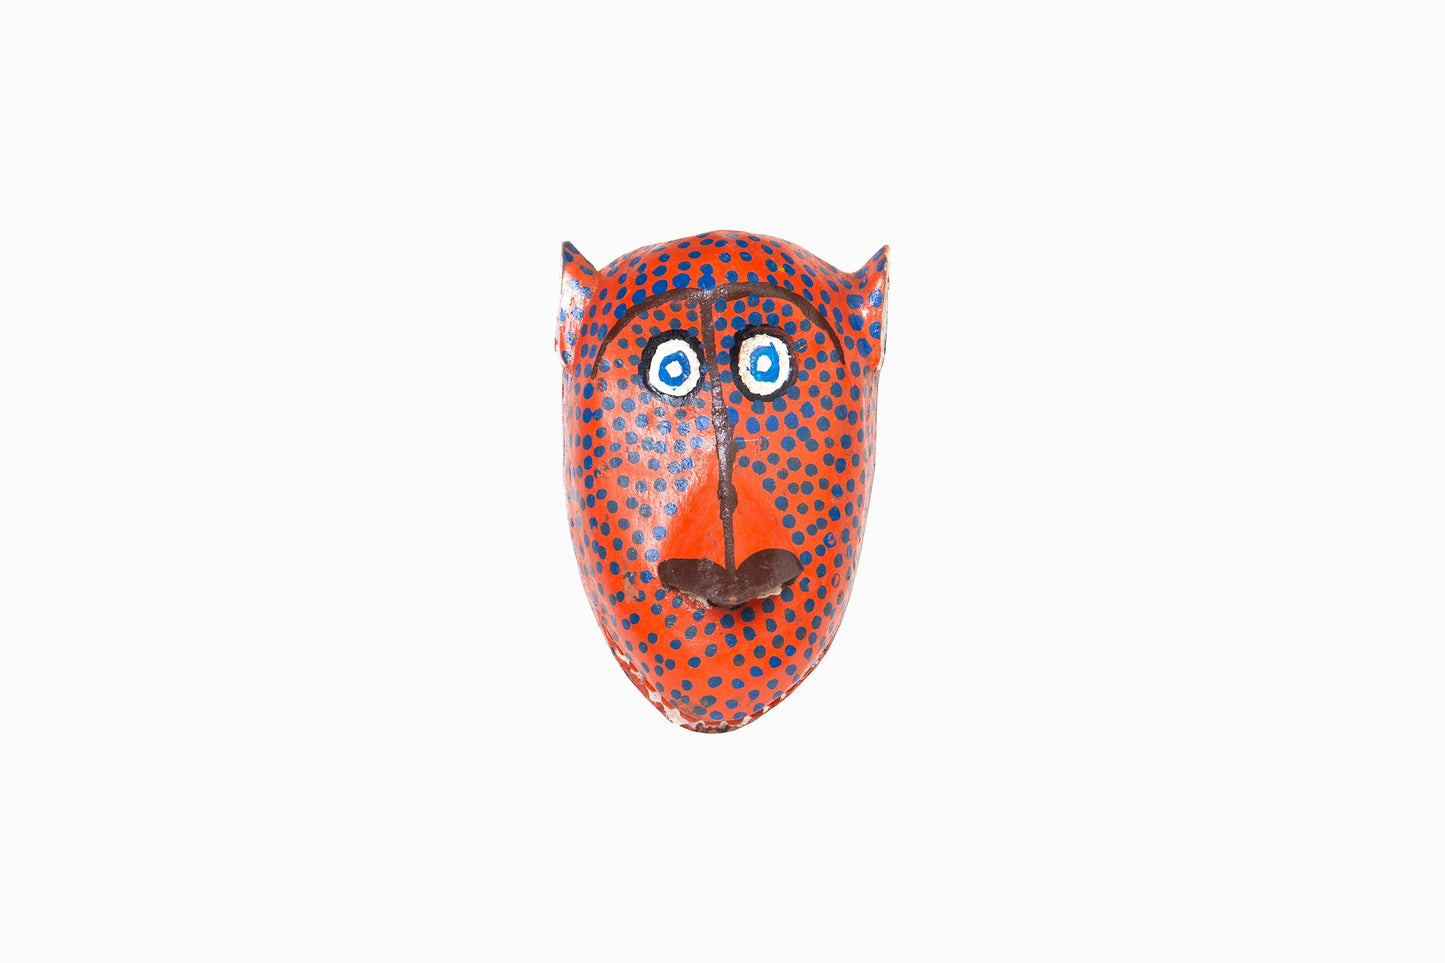 Spotty Bozo Cheetah Mask (red with blue spots)